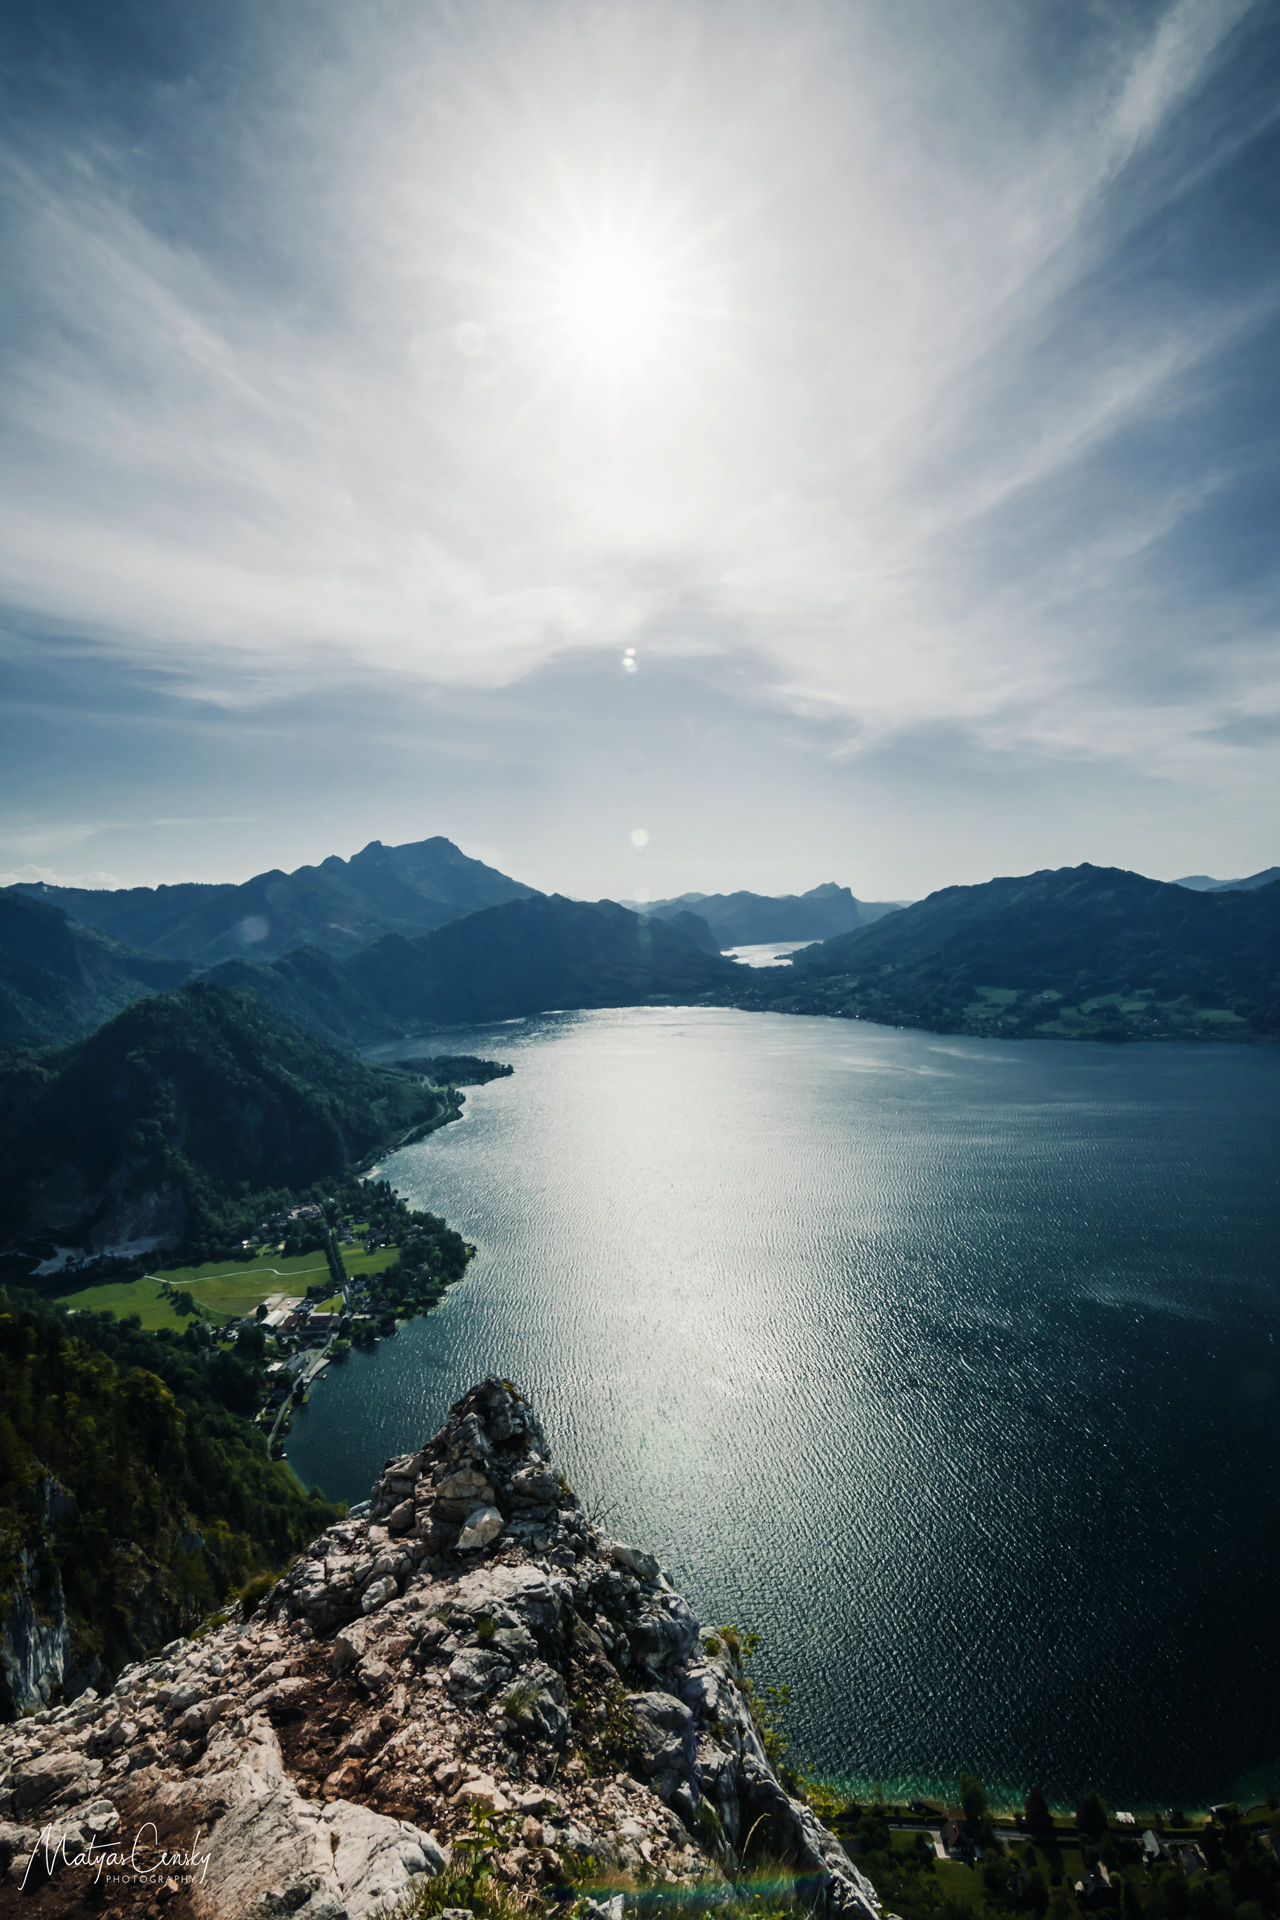 Landscape photo of Attersee in mid day from via ferrrata with a rock in the foreground and Mondsee in the background.